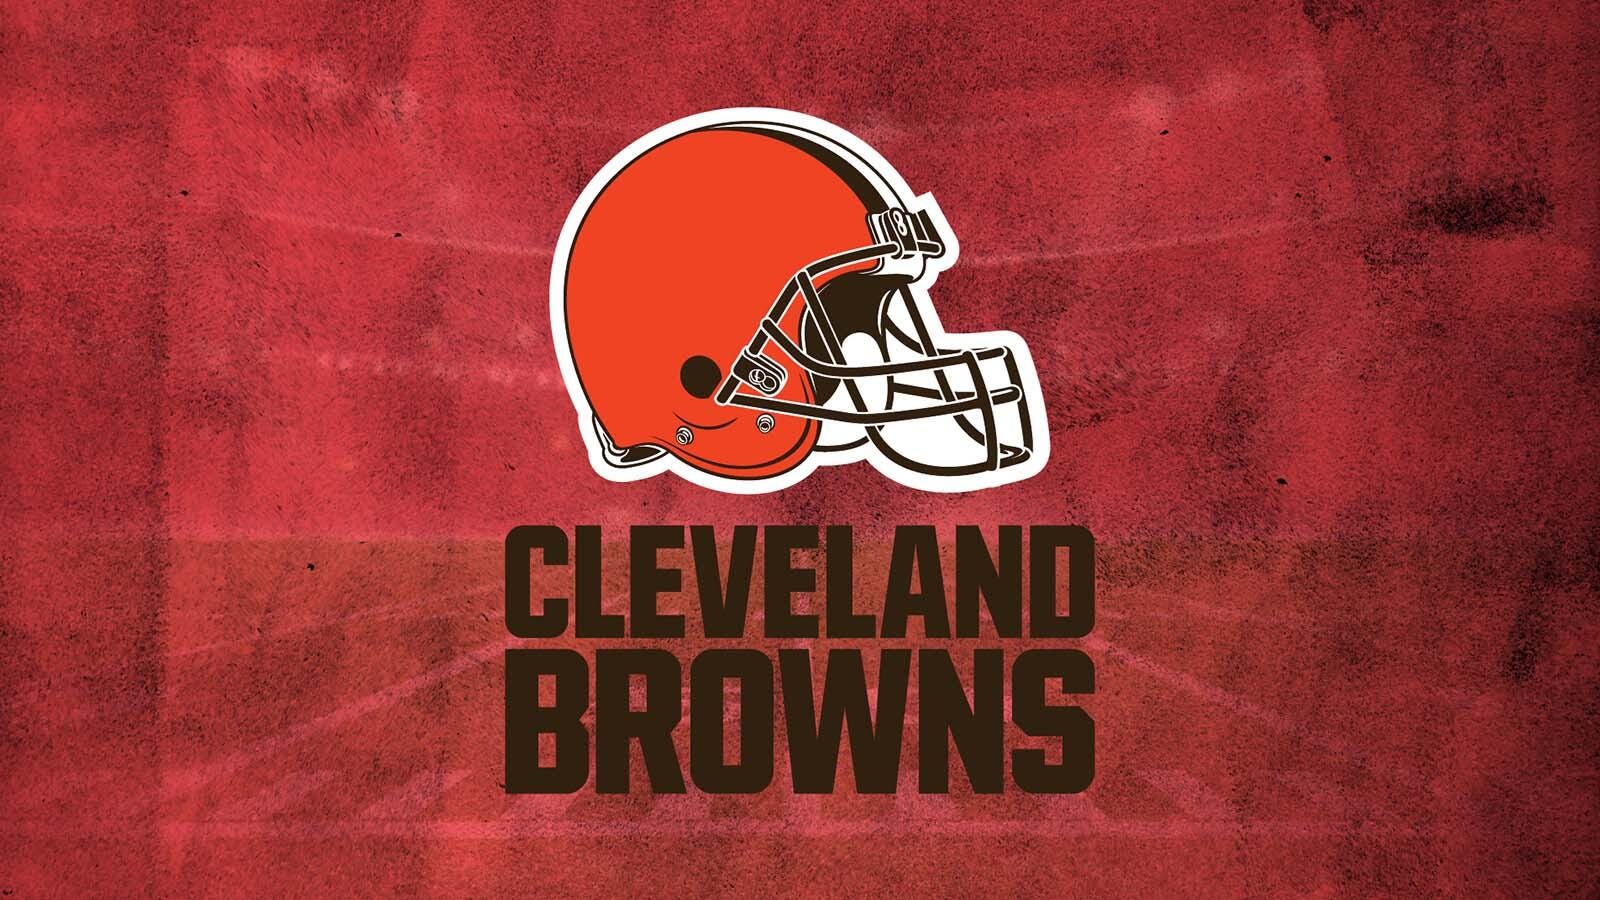 what channel are the cleveland browns playing on today